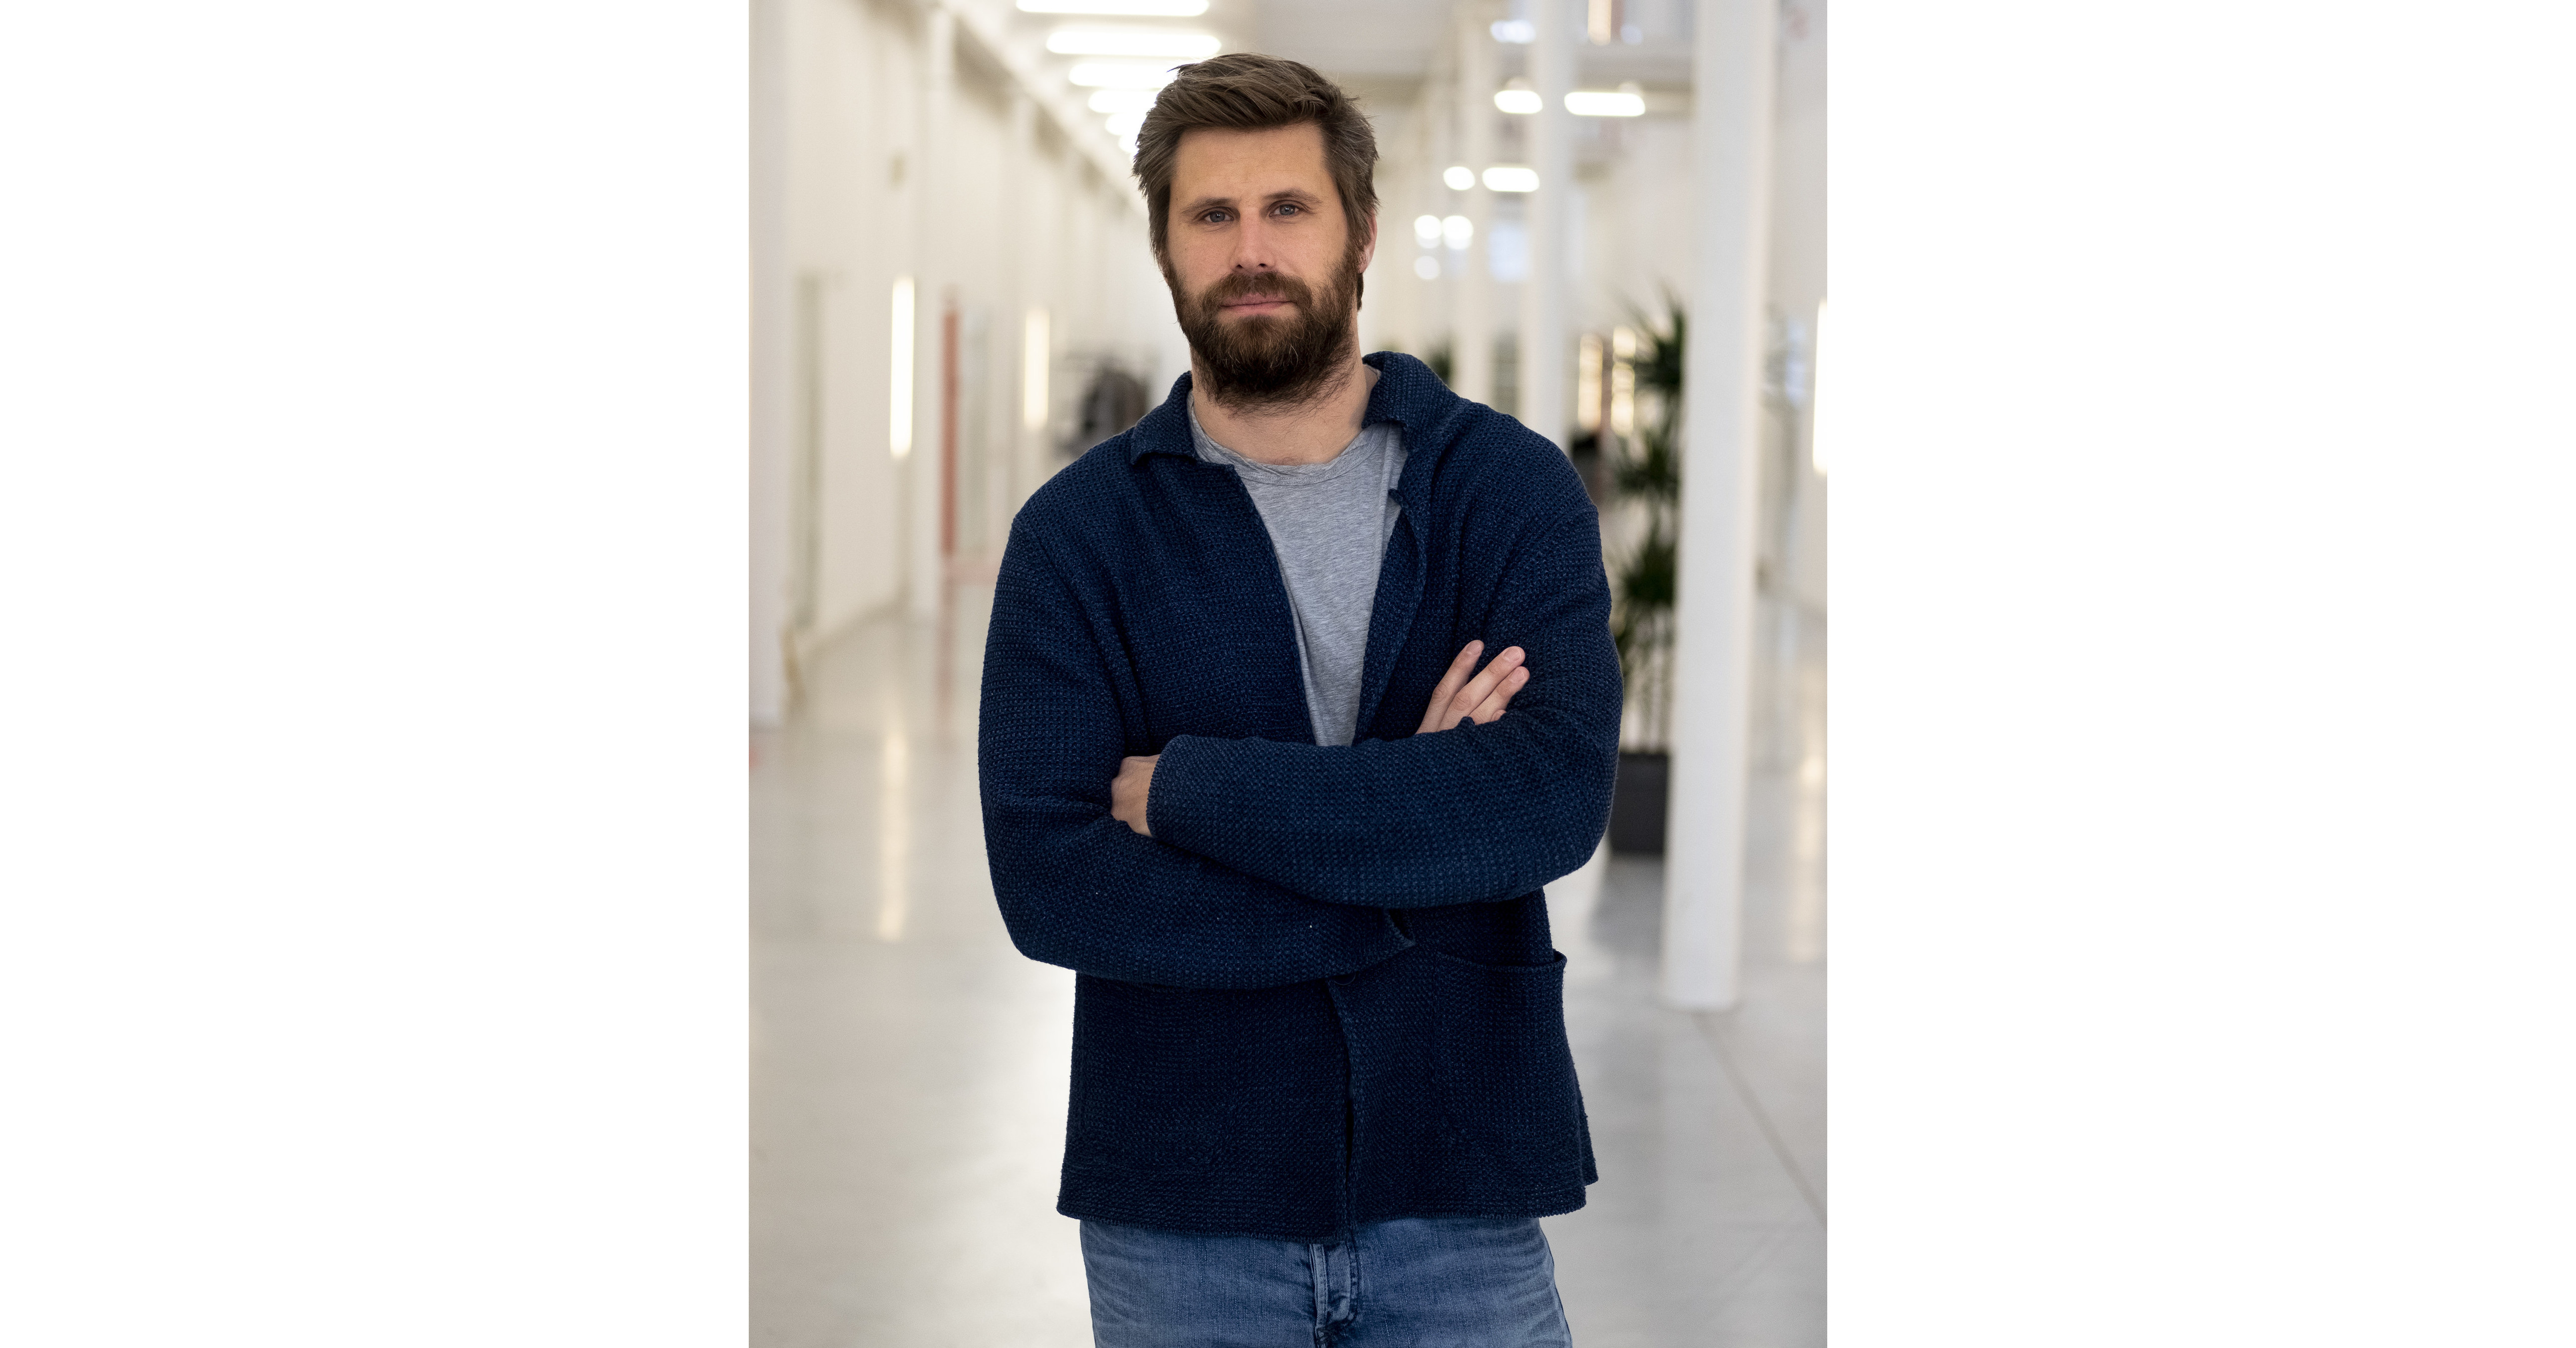 Vestiaire Collective raises €178M to accelerate growth and drive